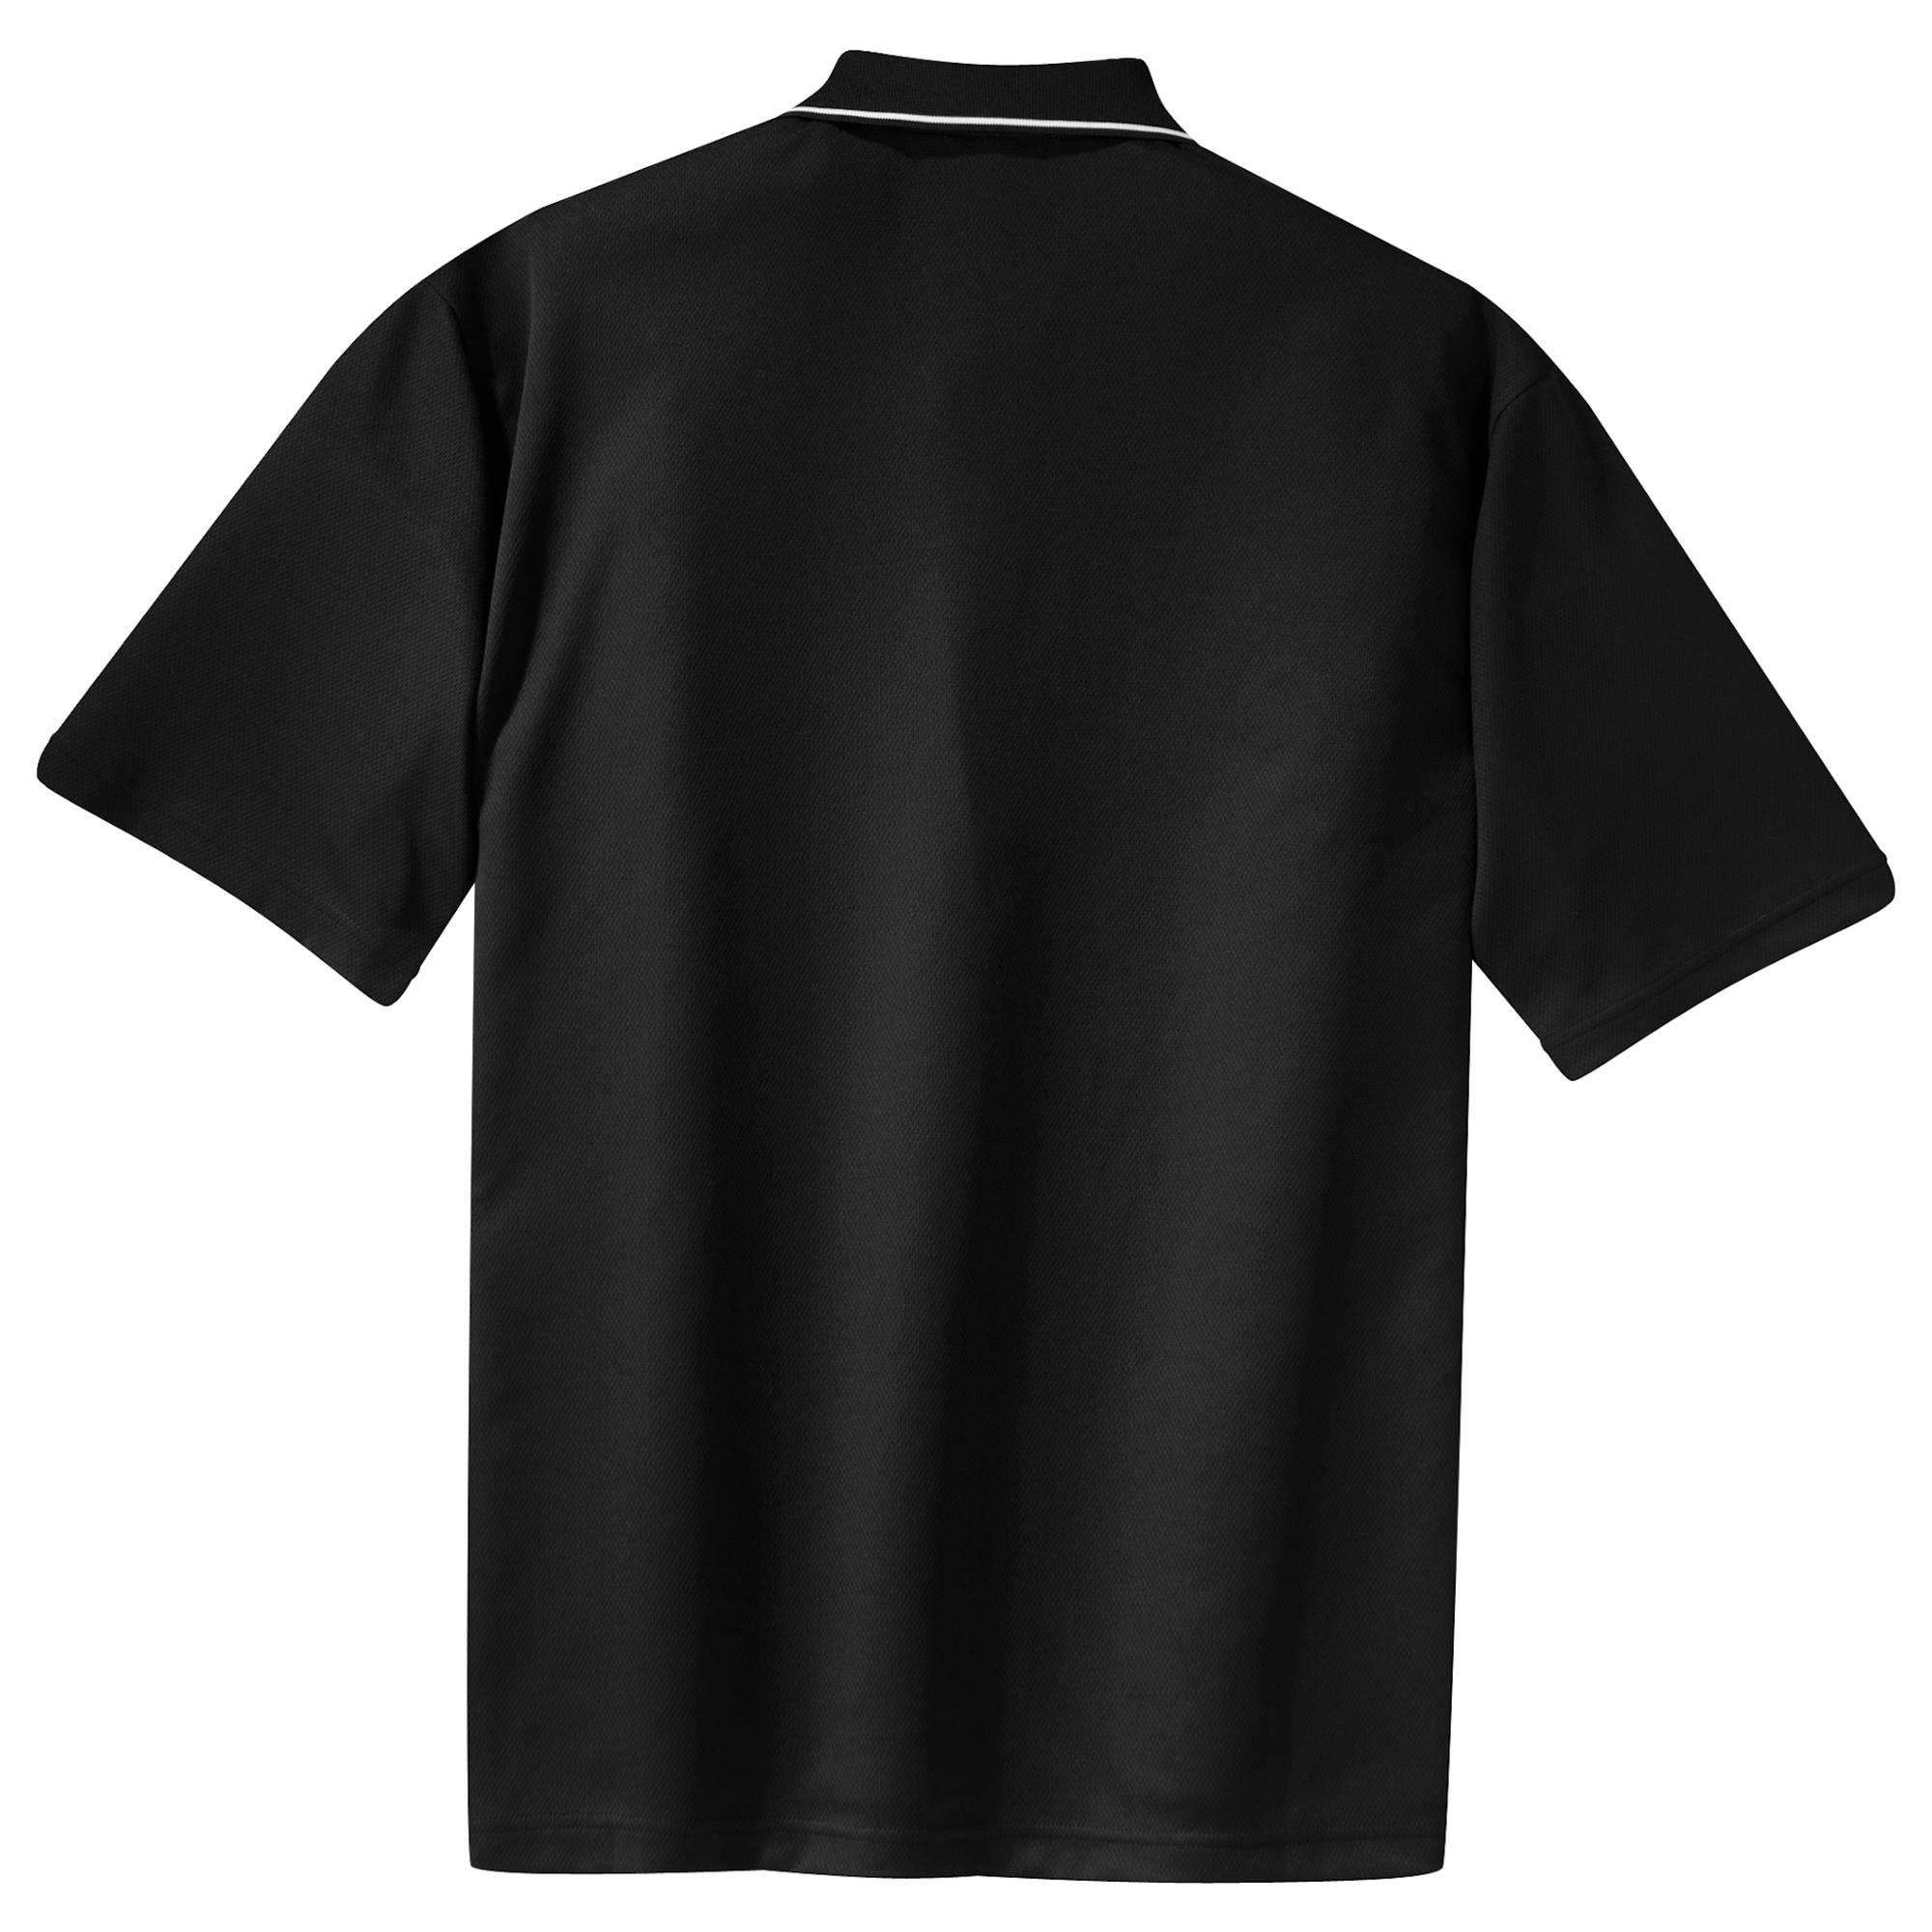 Sport-Tek K467 Dri-Mesh Polo with Tipped Collar and Piping - Black ...